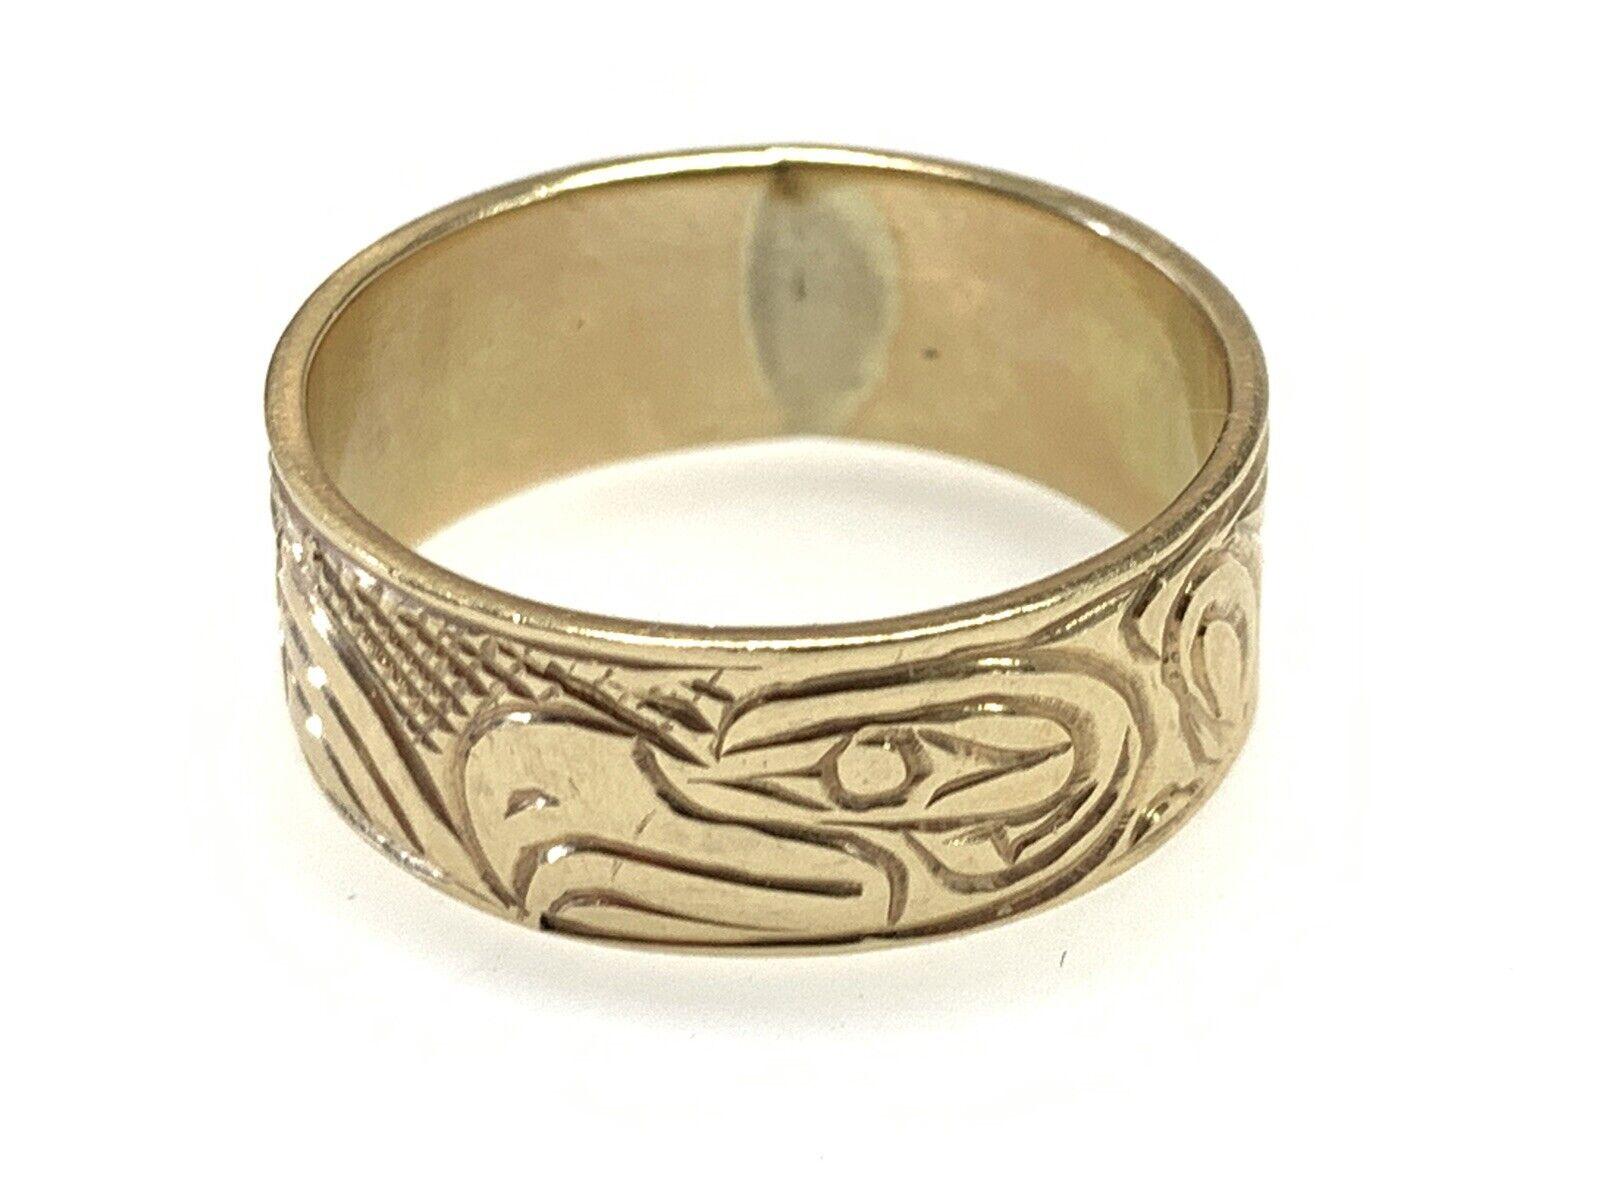 This ring is finely crafted from 14K yellow gold, and is hand carved by a Haida artisan. It features an Eagle motif, which symbolizes power and grace. The Eagle Symbol is known as “The master of skies” and is an important symbol in the Haida tribe.